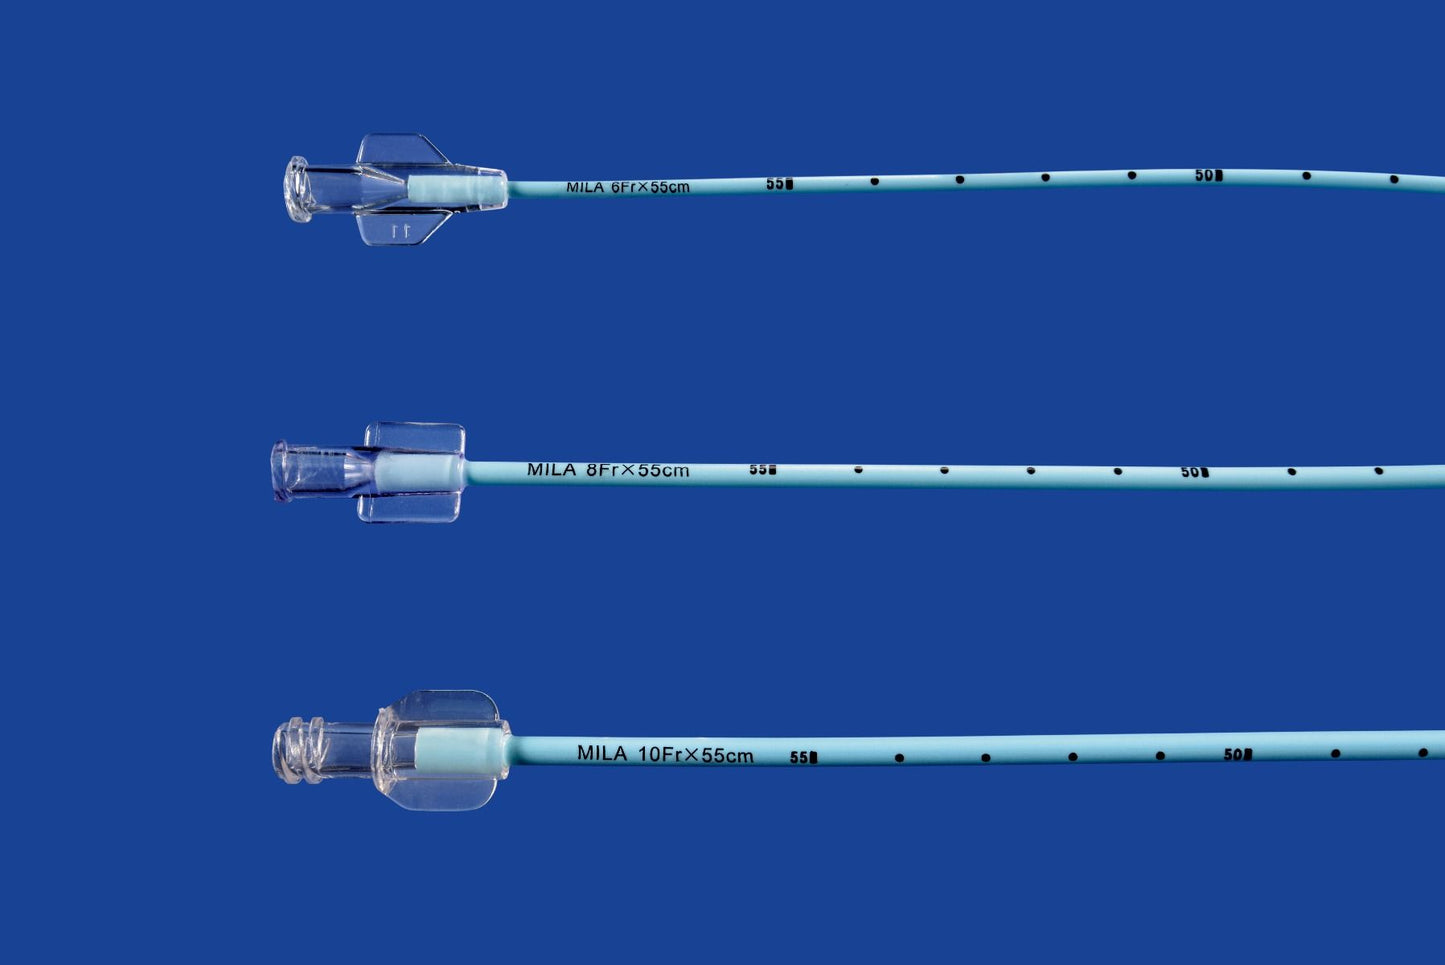 Retropulsion™ Urinary Catheters (RUC) for Male Canine